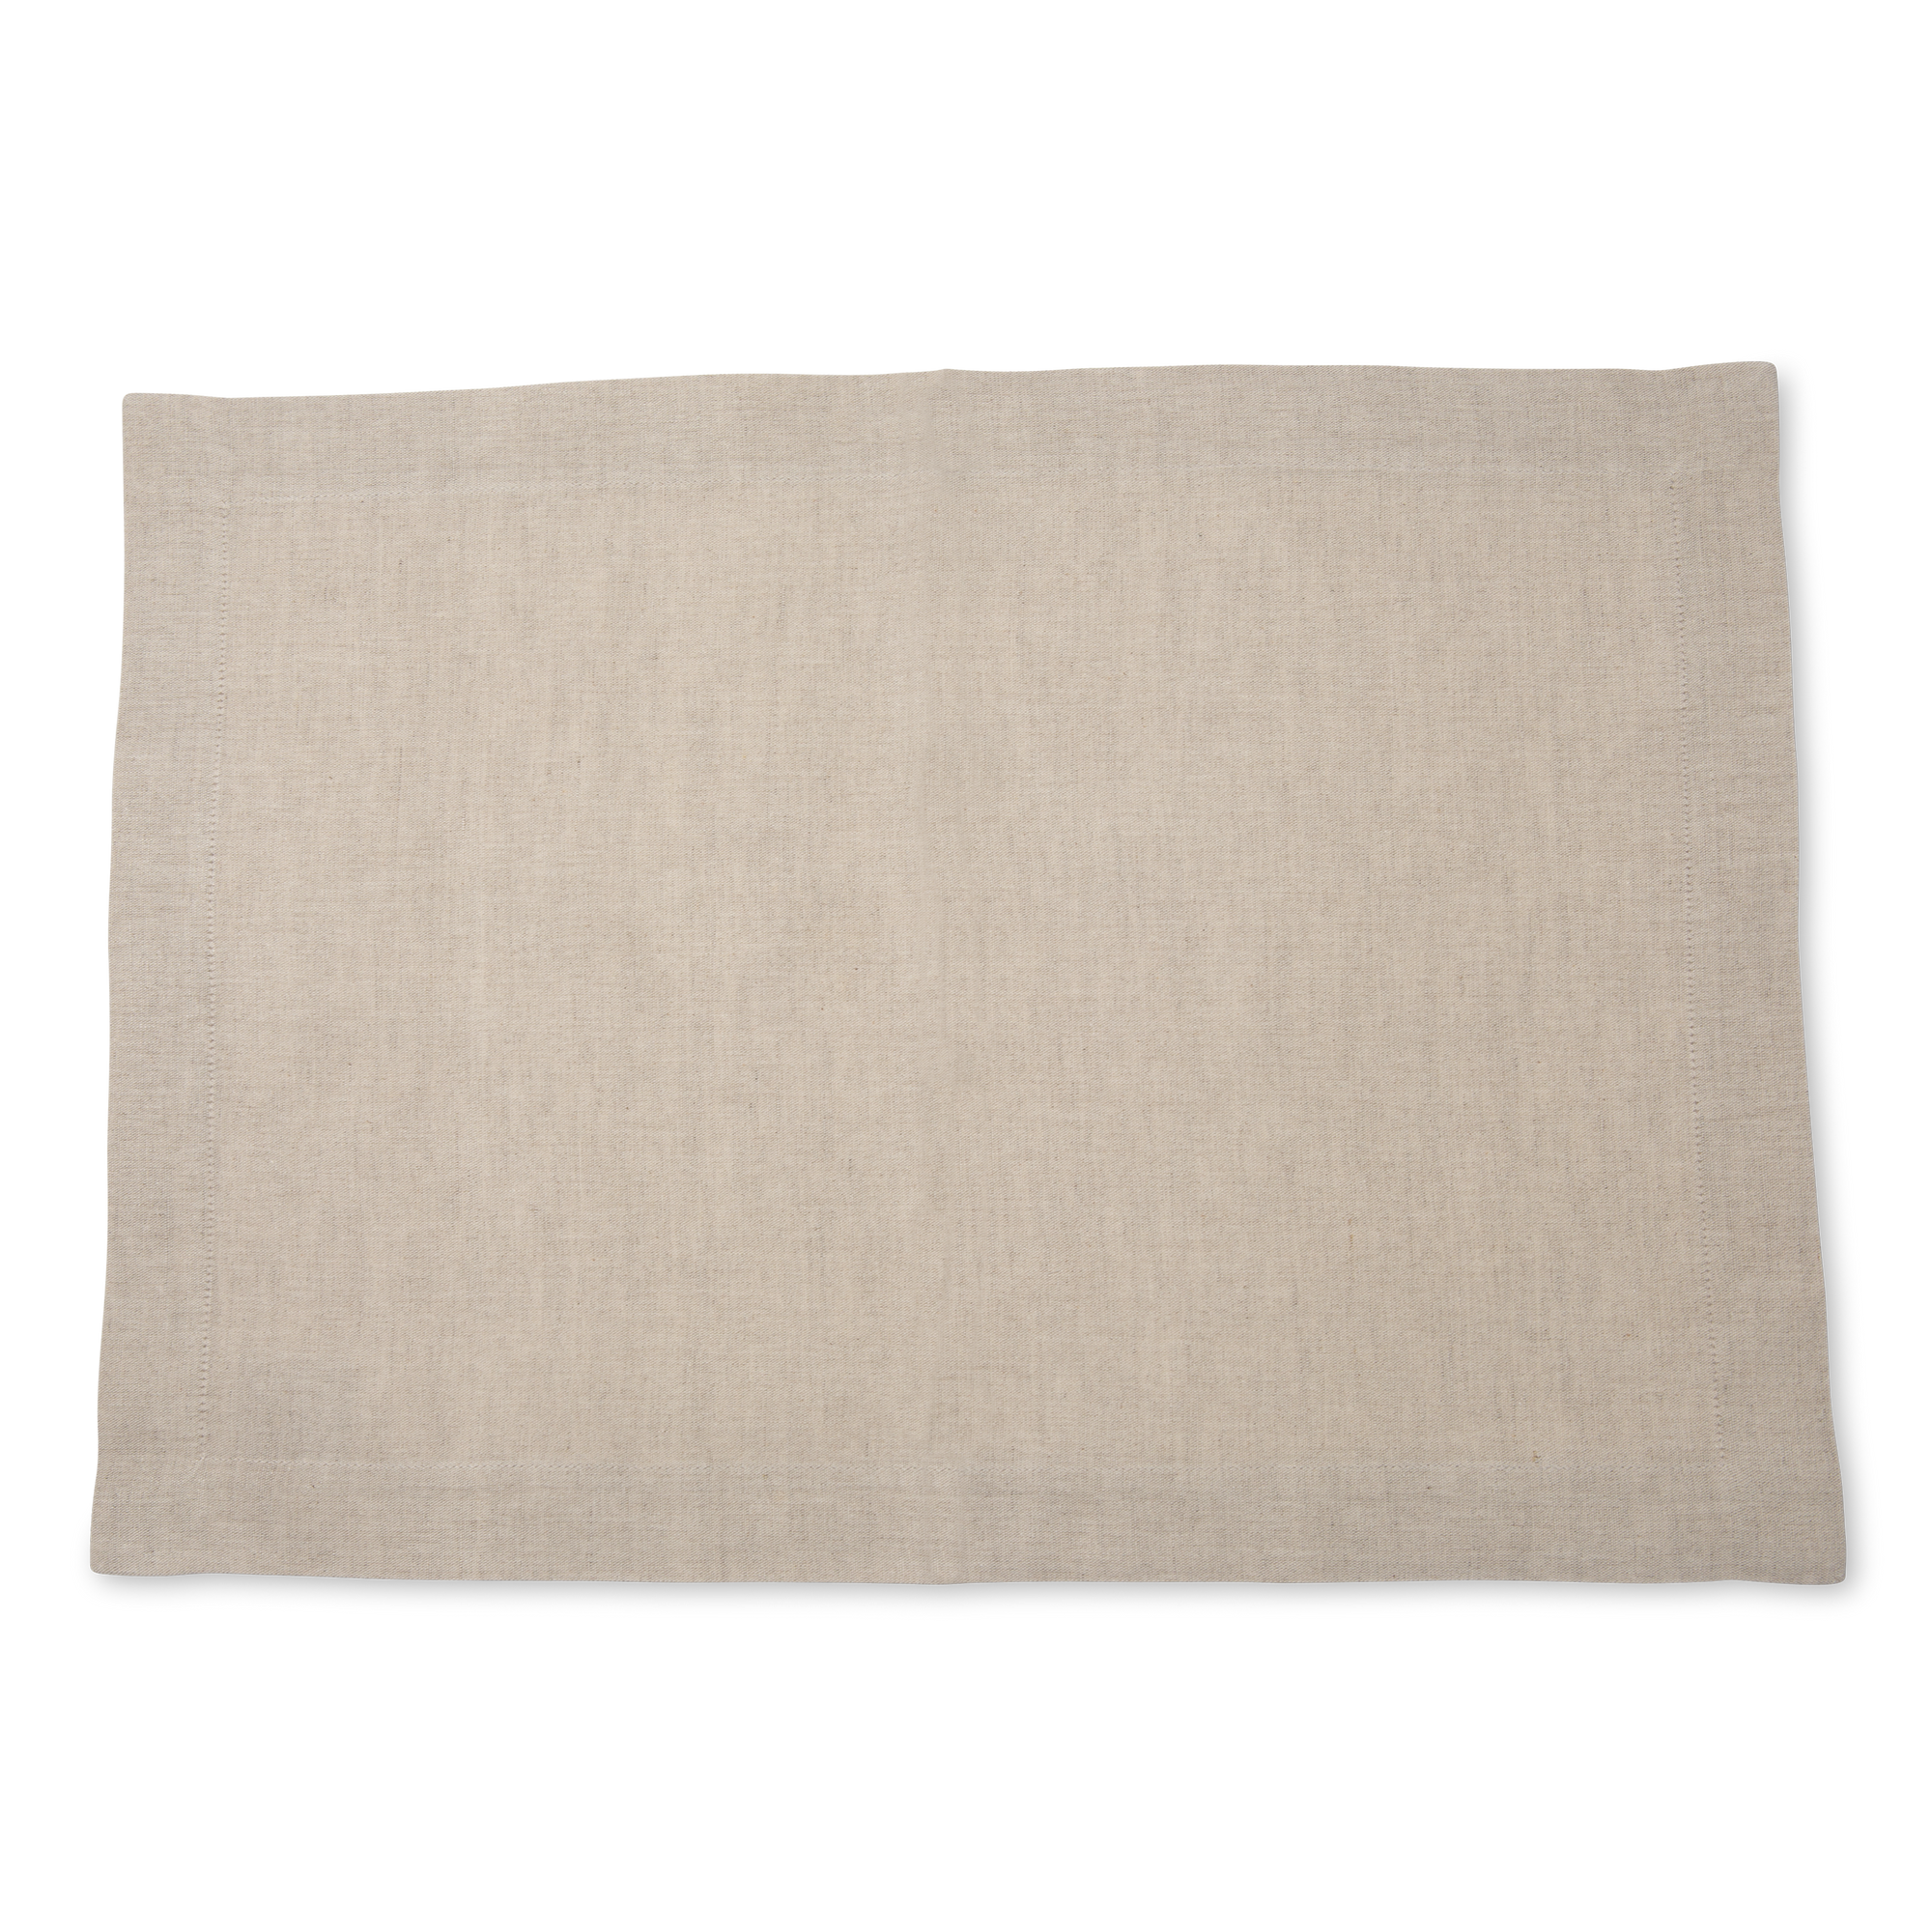 The Solid Linen Placemat features simple and elegant in natural.